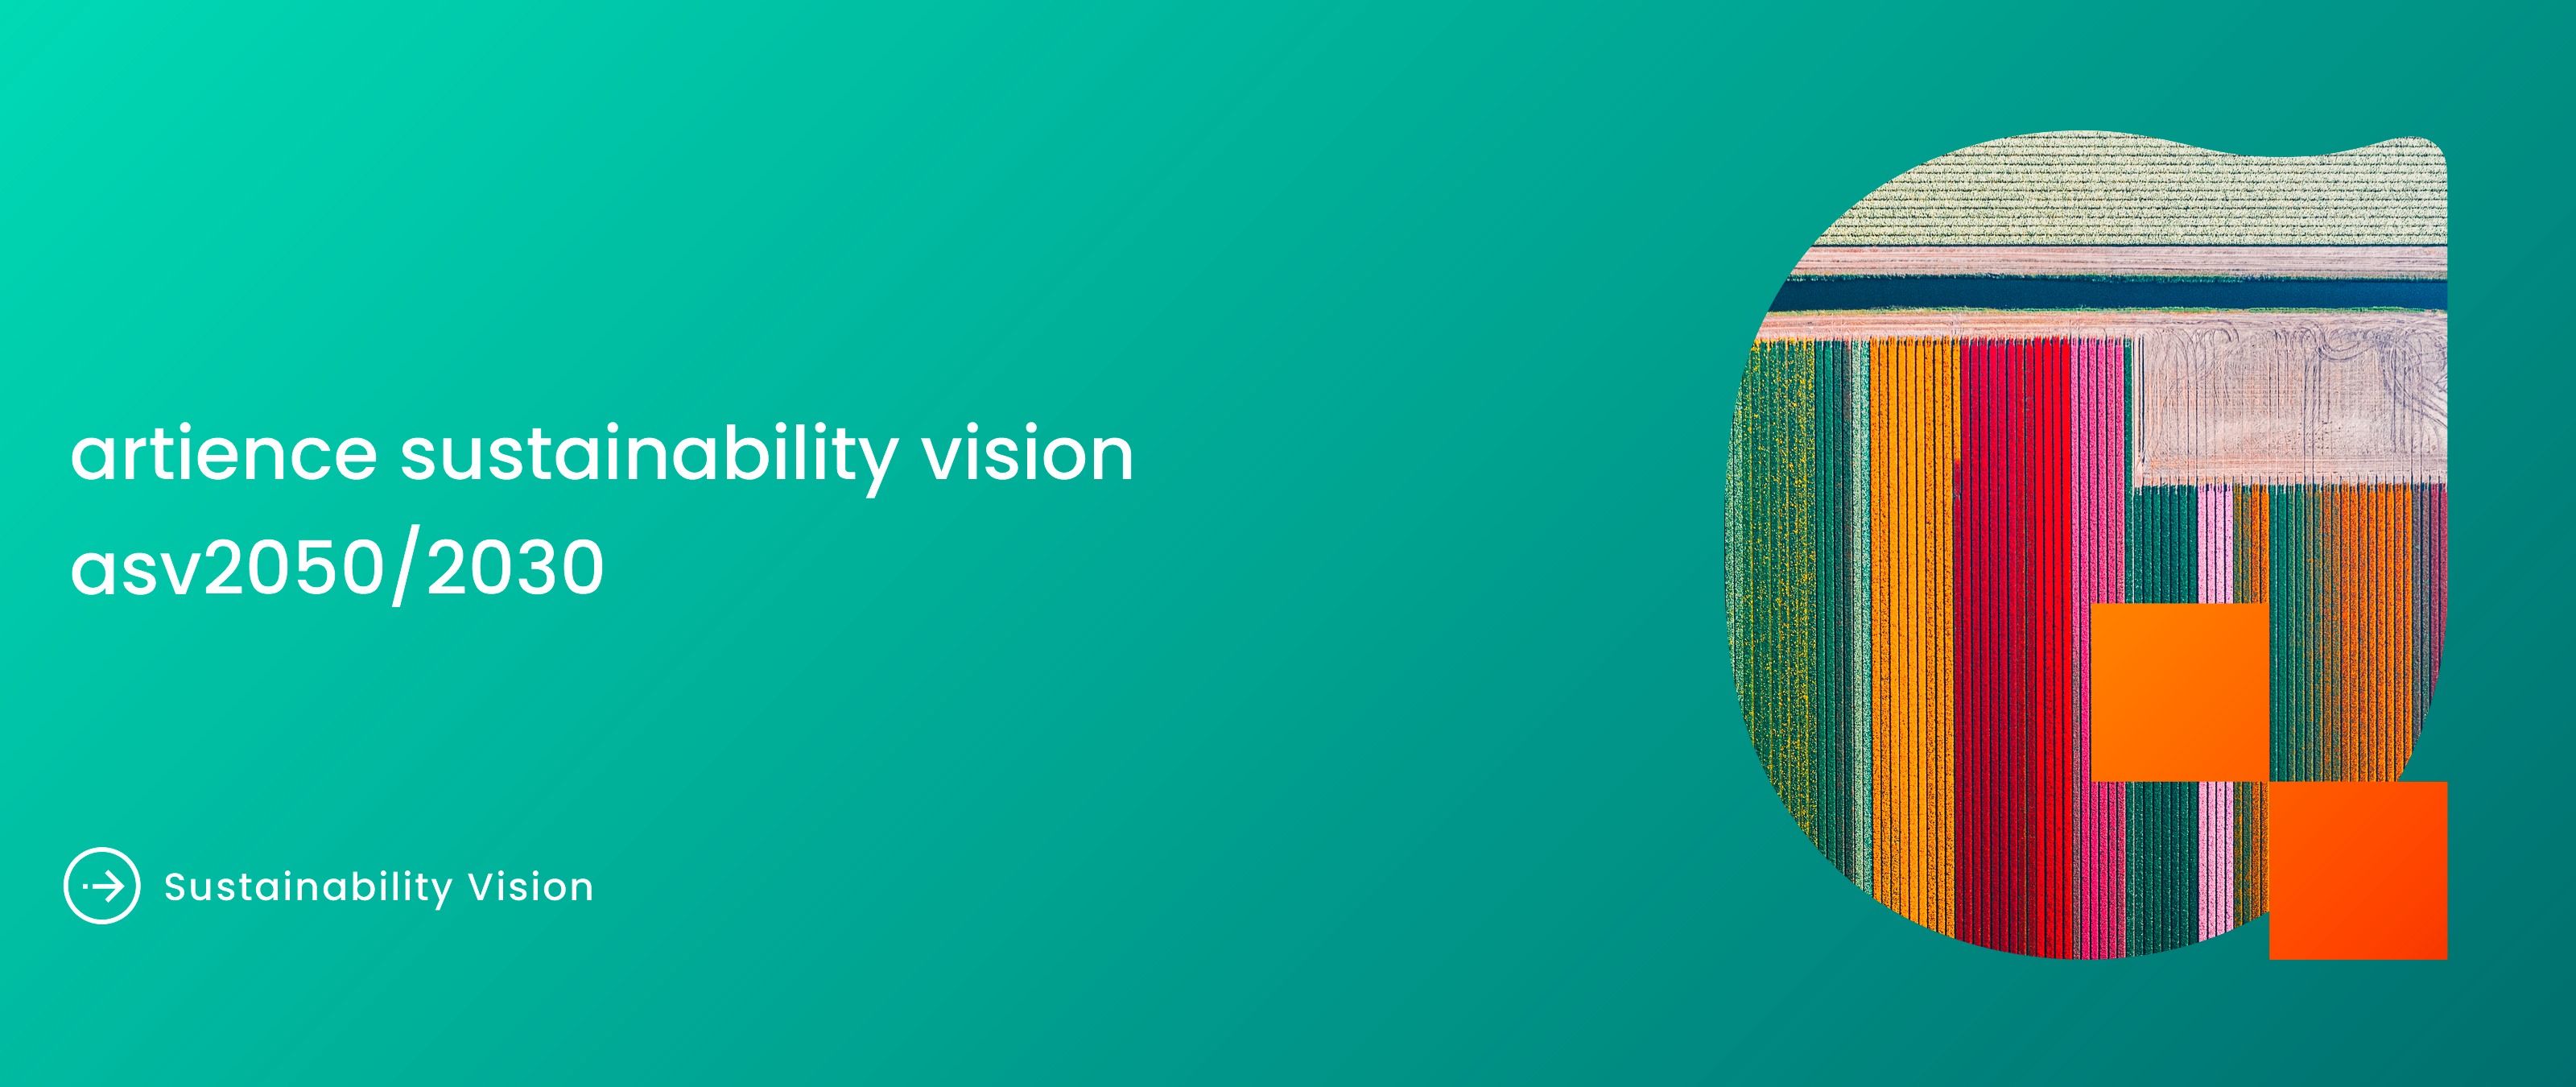 artience Sustainability Vision 2050/2030